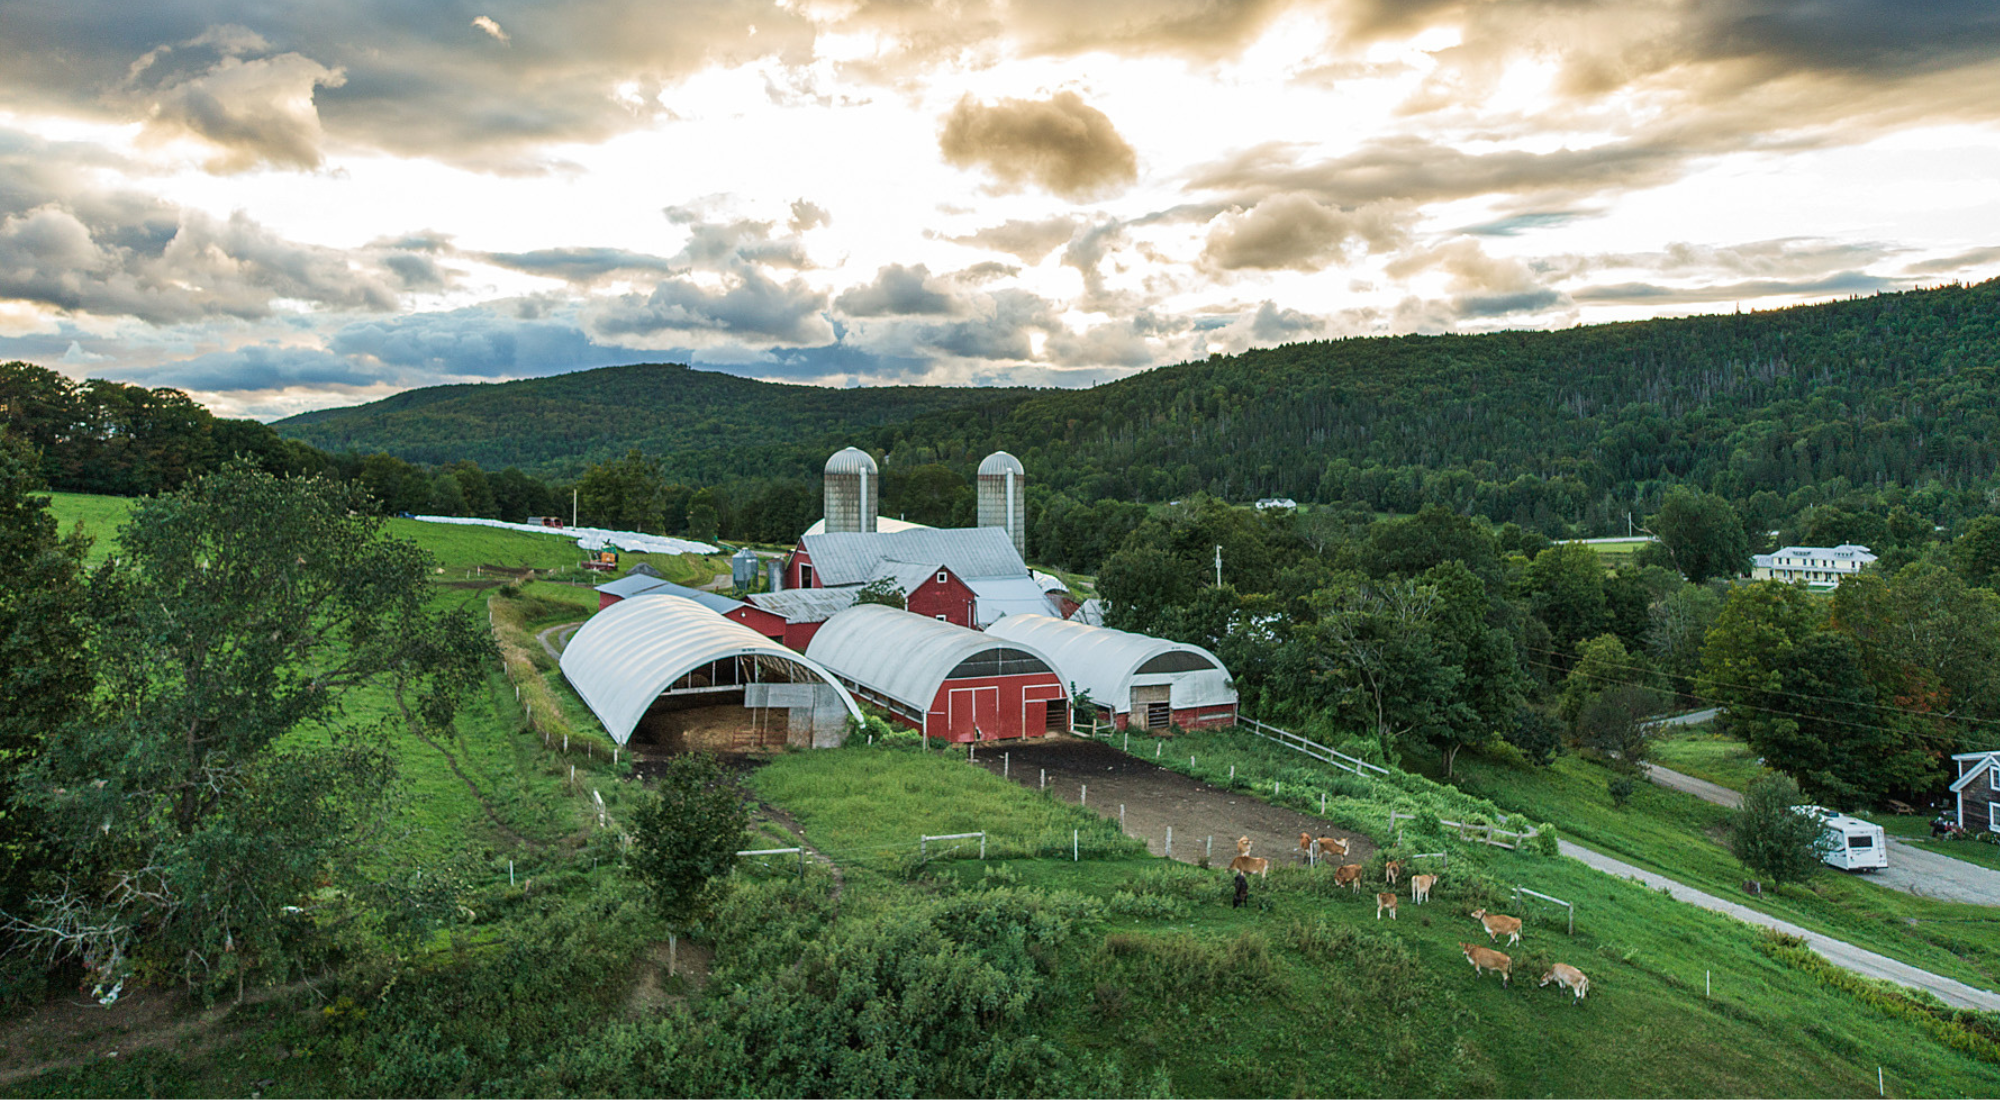 Stonyfield Organic: On A Mission To Make A Difference